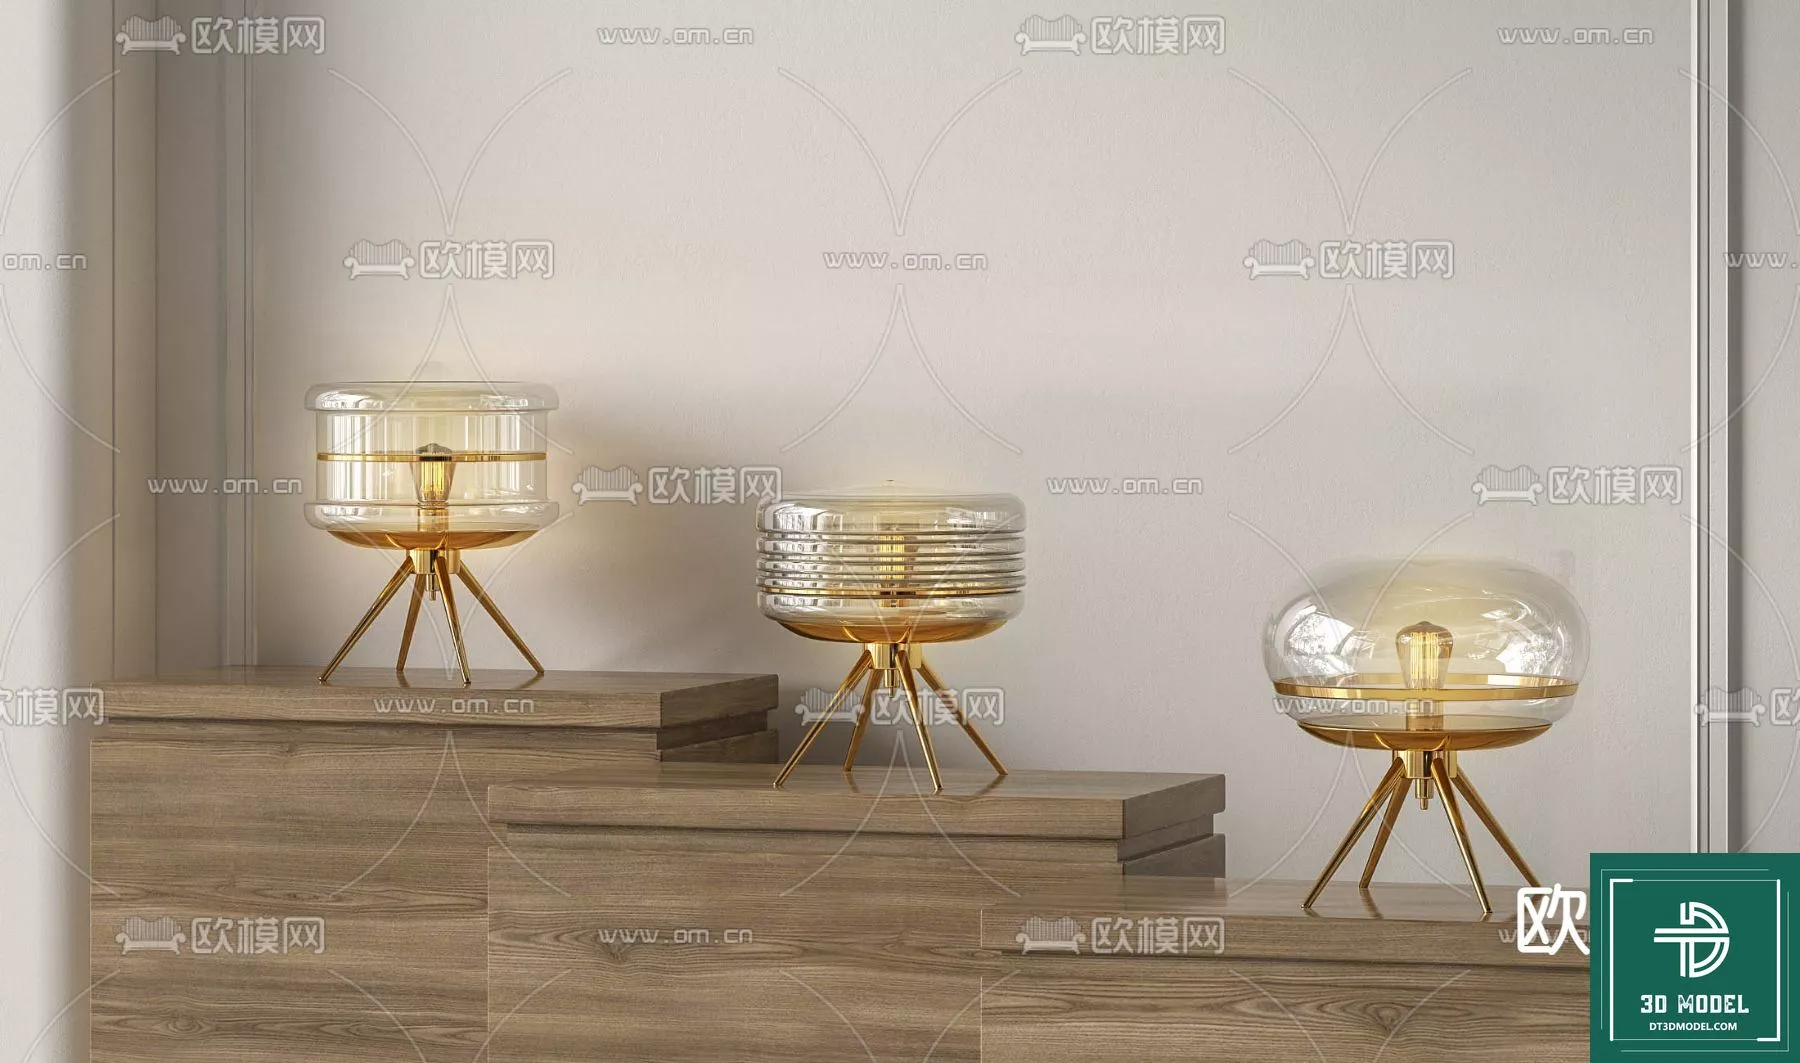 MODERN TABLE LAMP - SKETCHUP 3D MODEL - VRAY OR ENSCAPE - ID14549